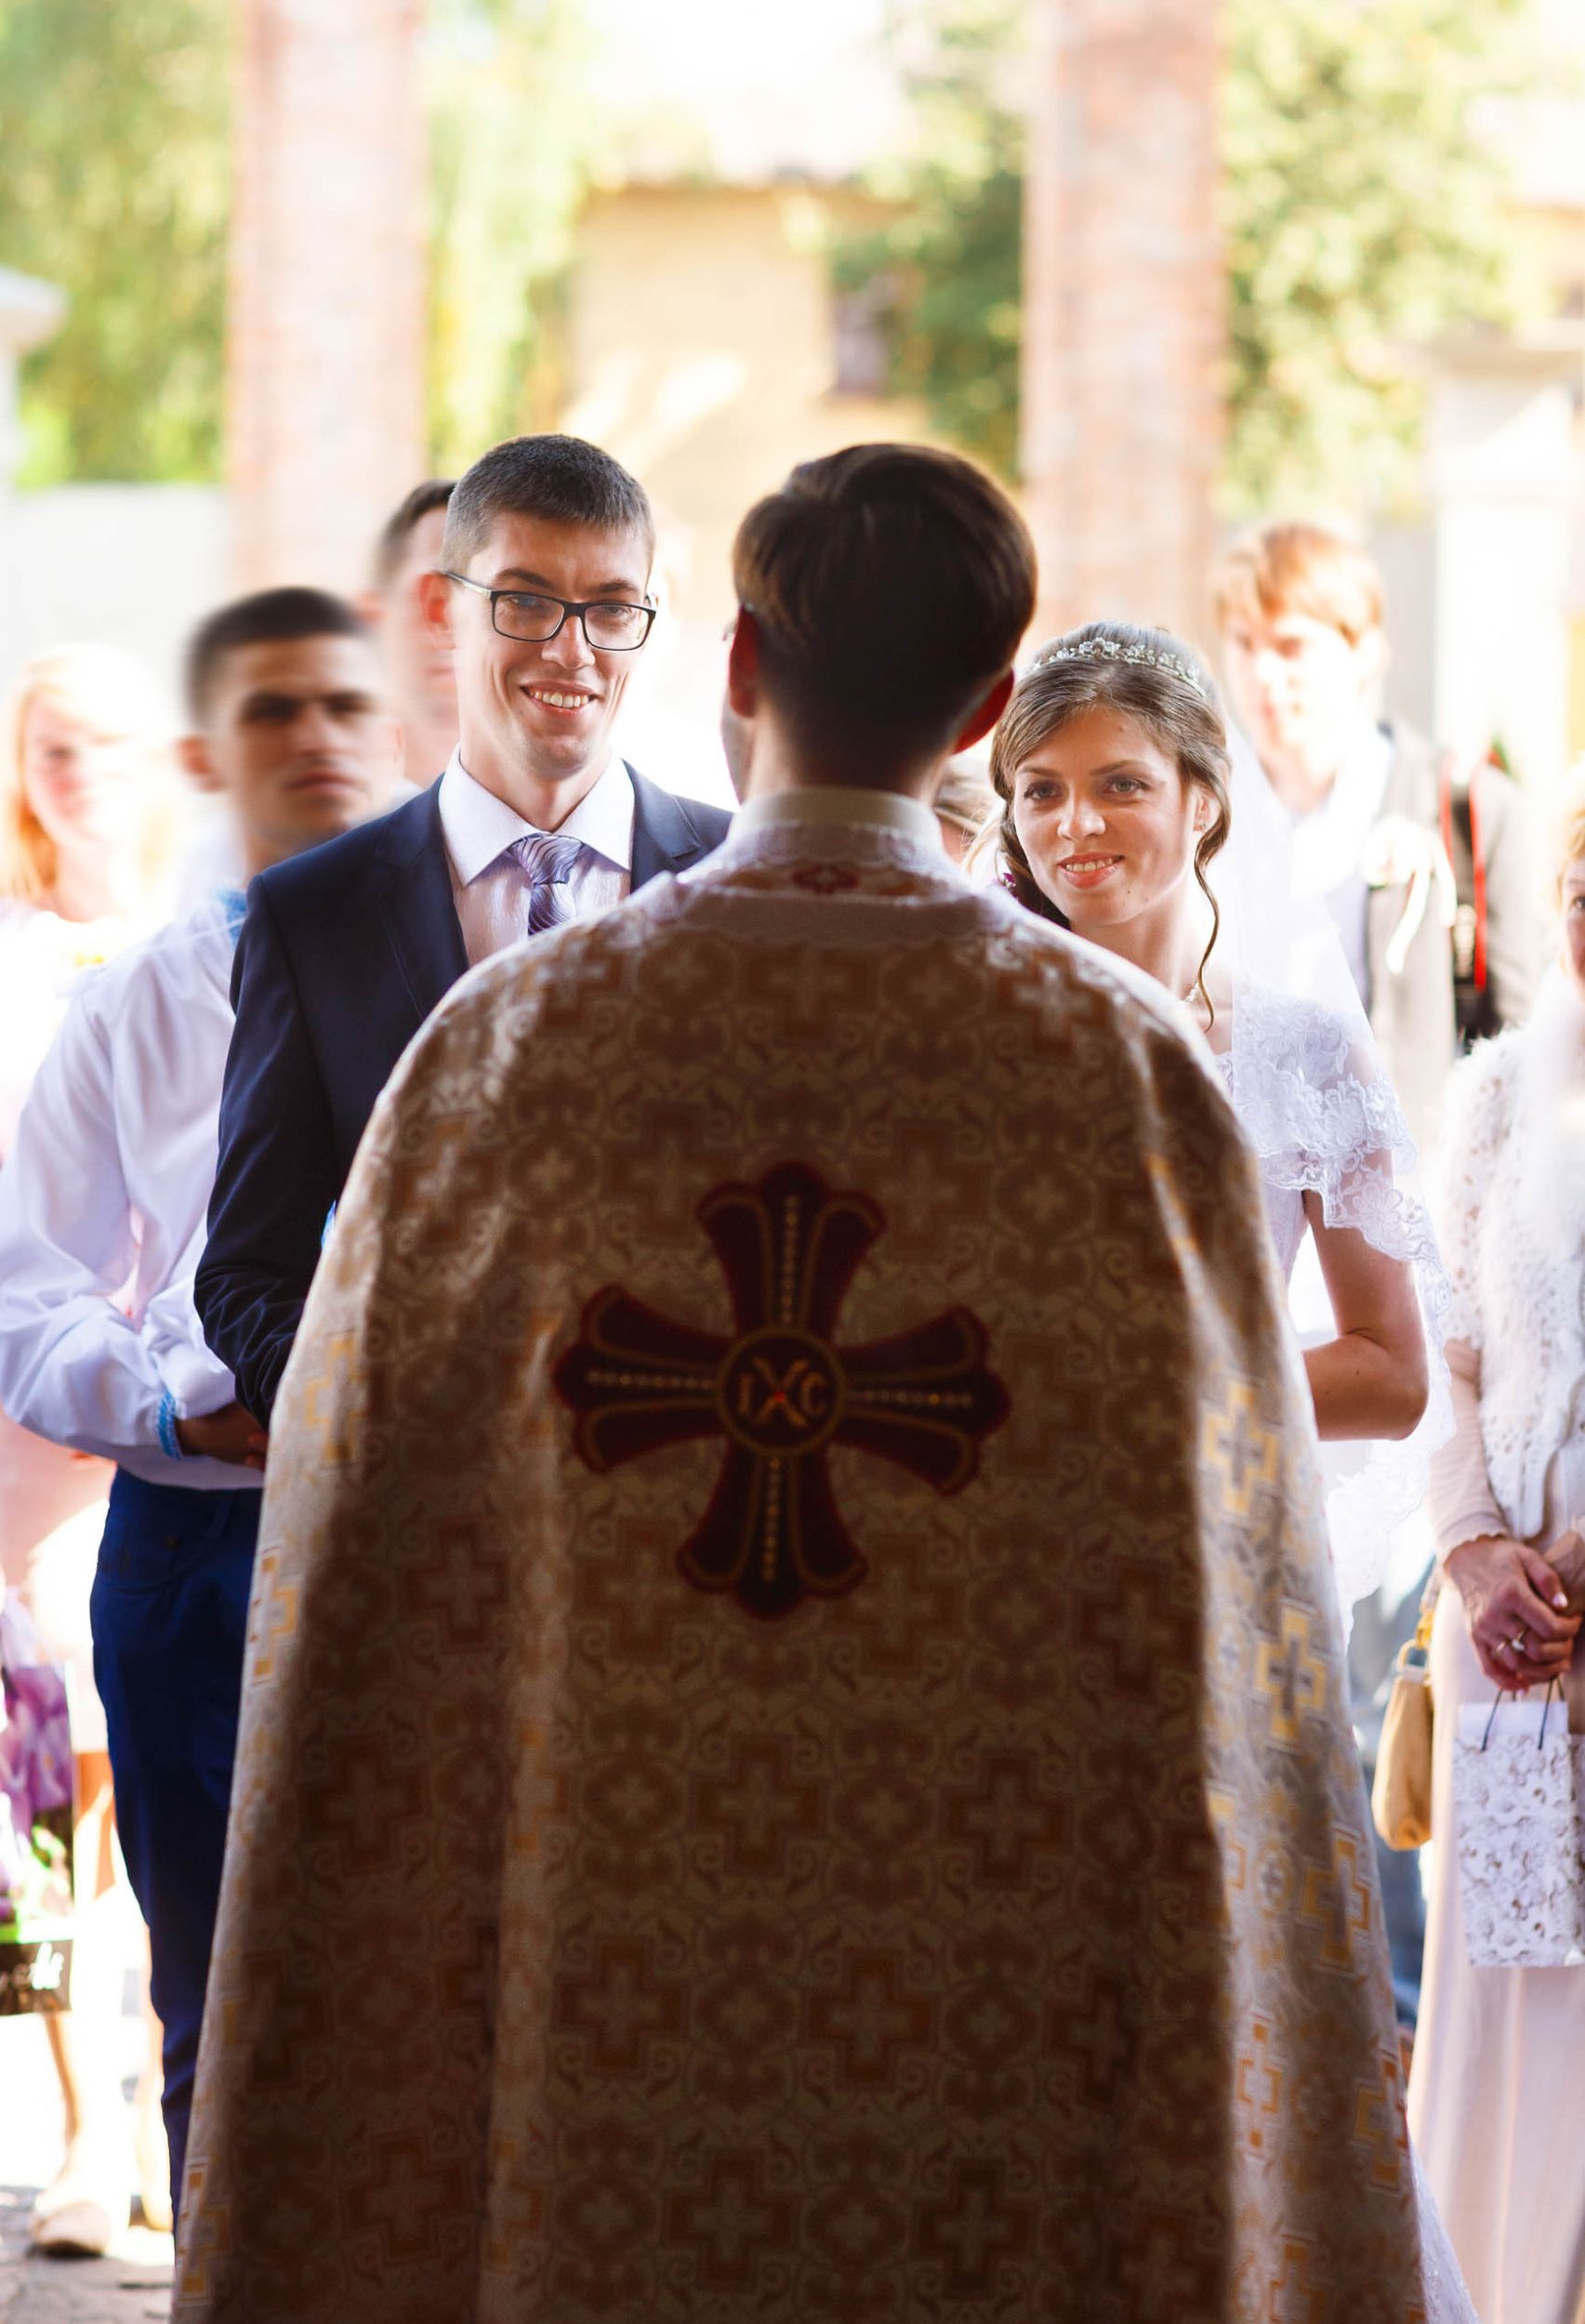 Should You Have A Religious Wedding Ceremony